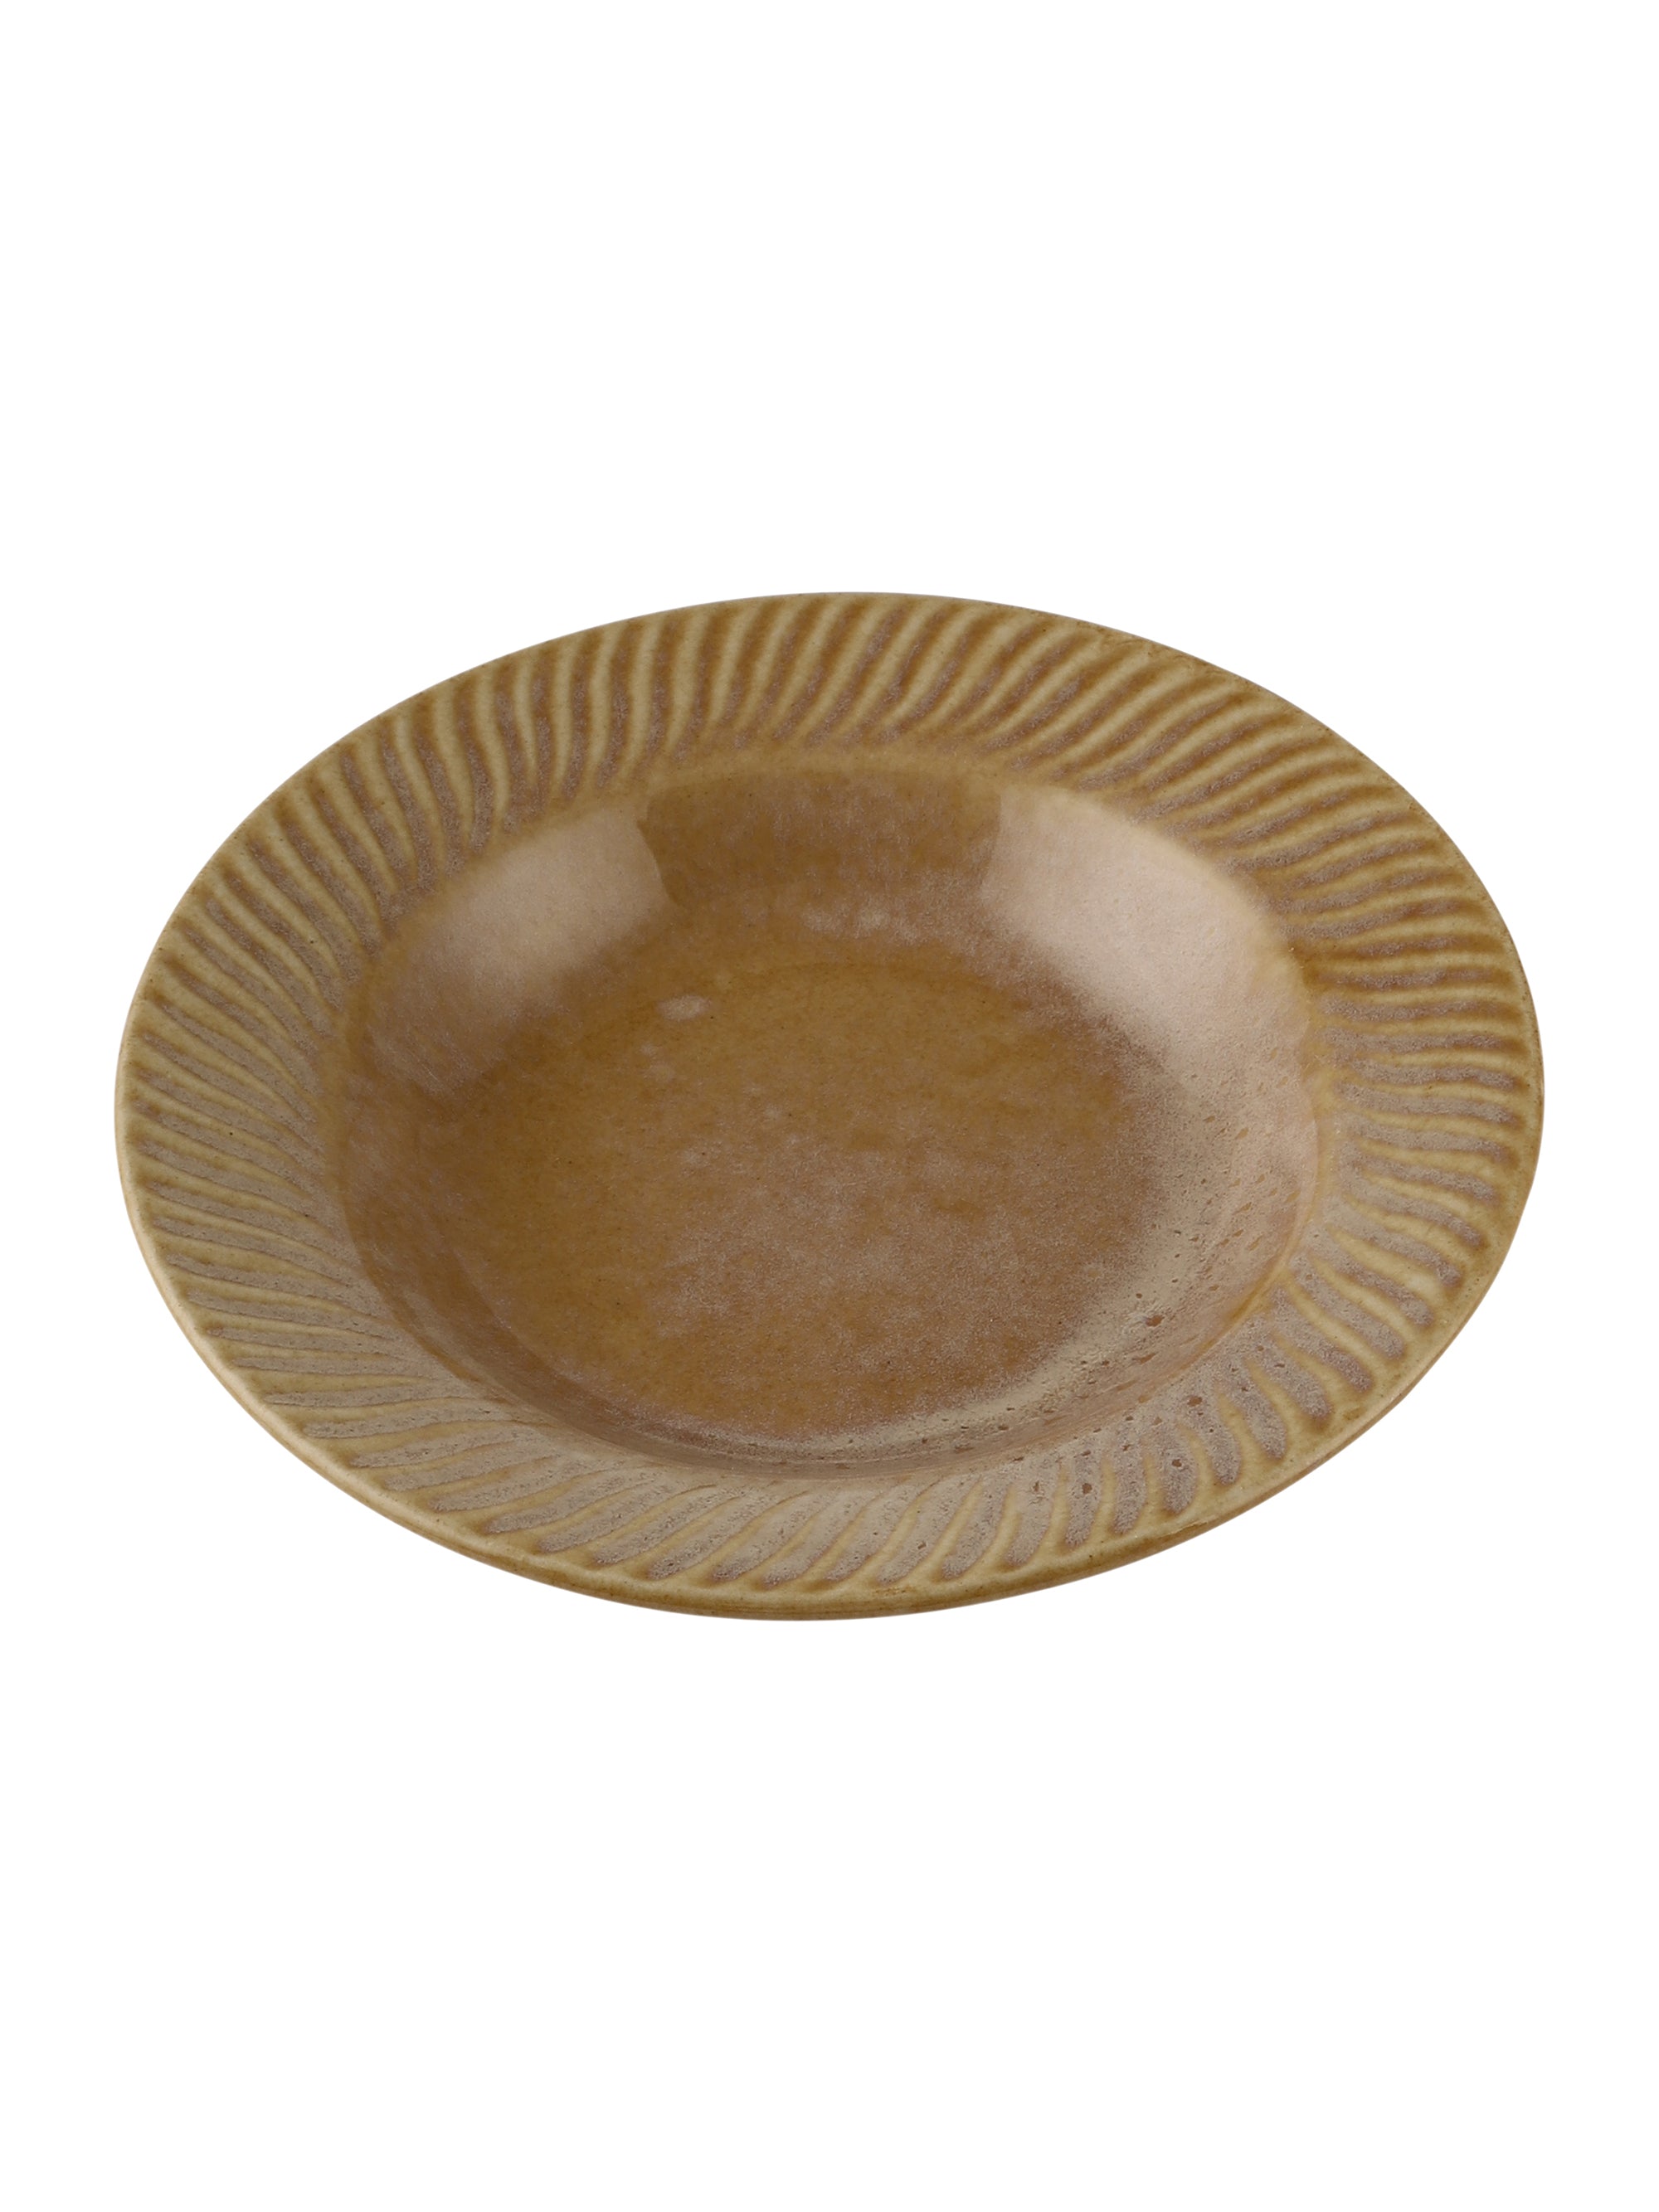 Ceramic Hand-Painted Plate - Set of 2 Plates (Gold, 7 Inch)